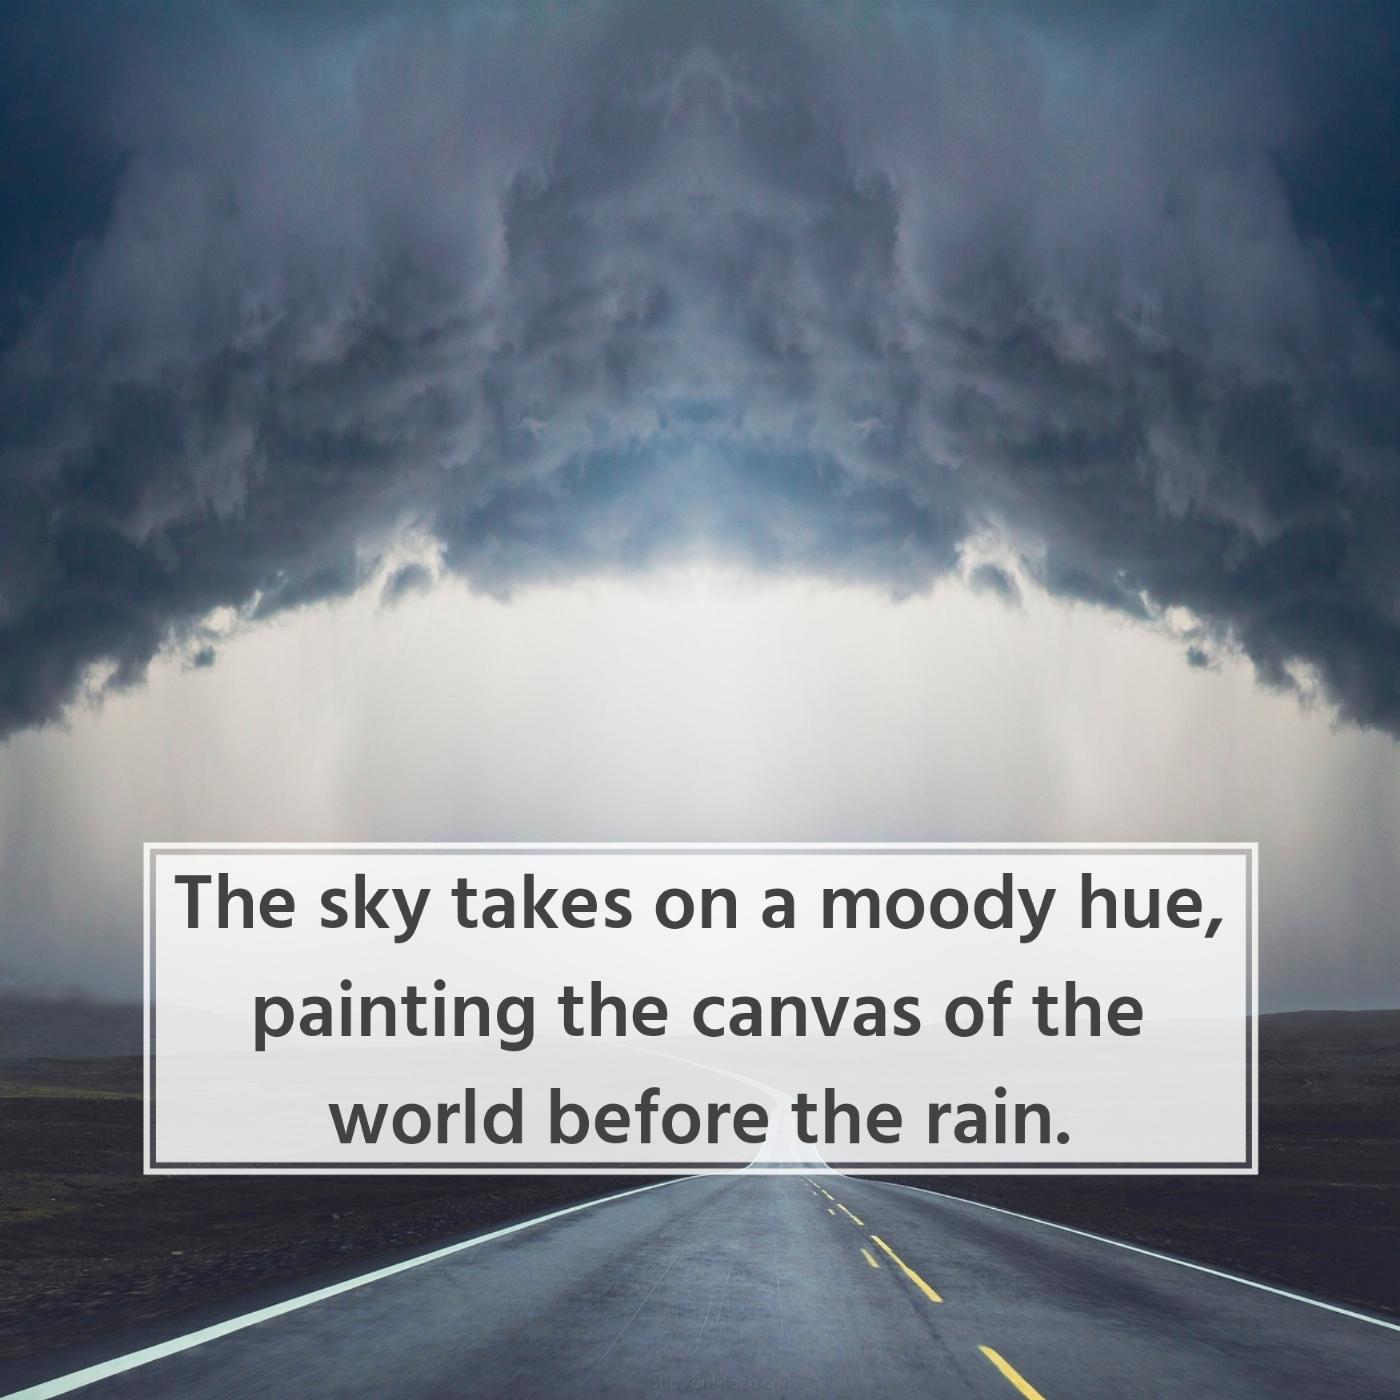 The sky takes on a moody hue painting the canvas of the world